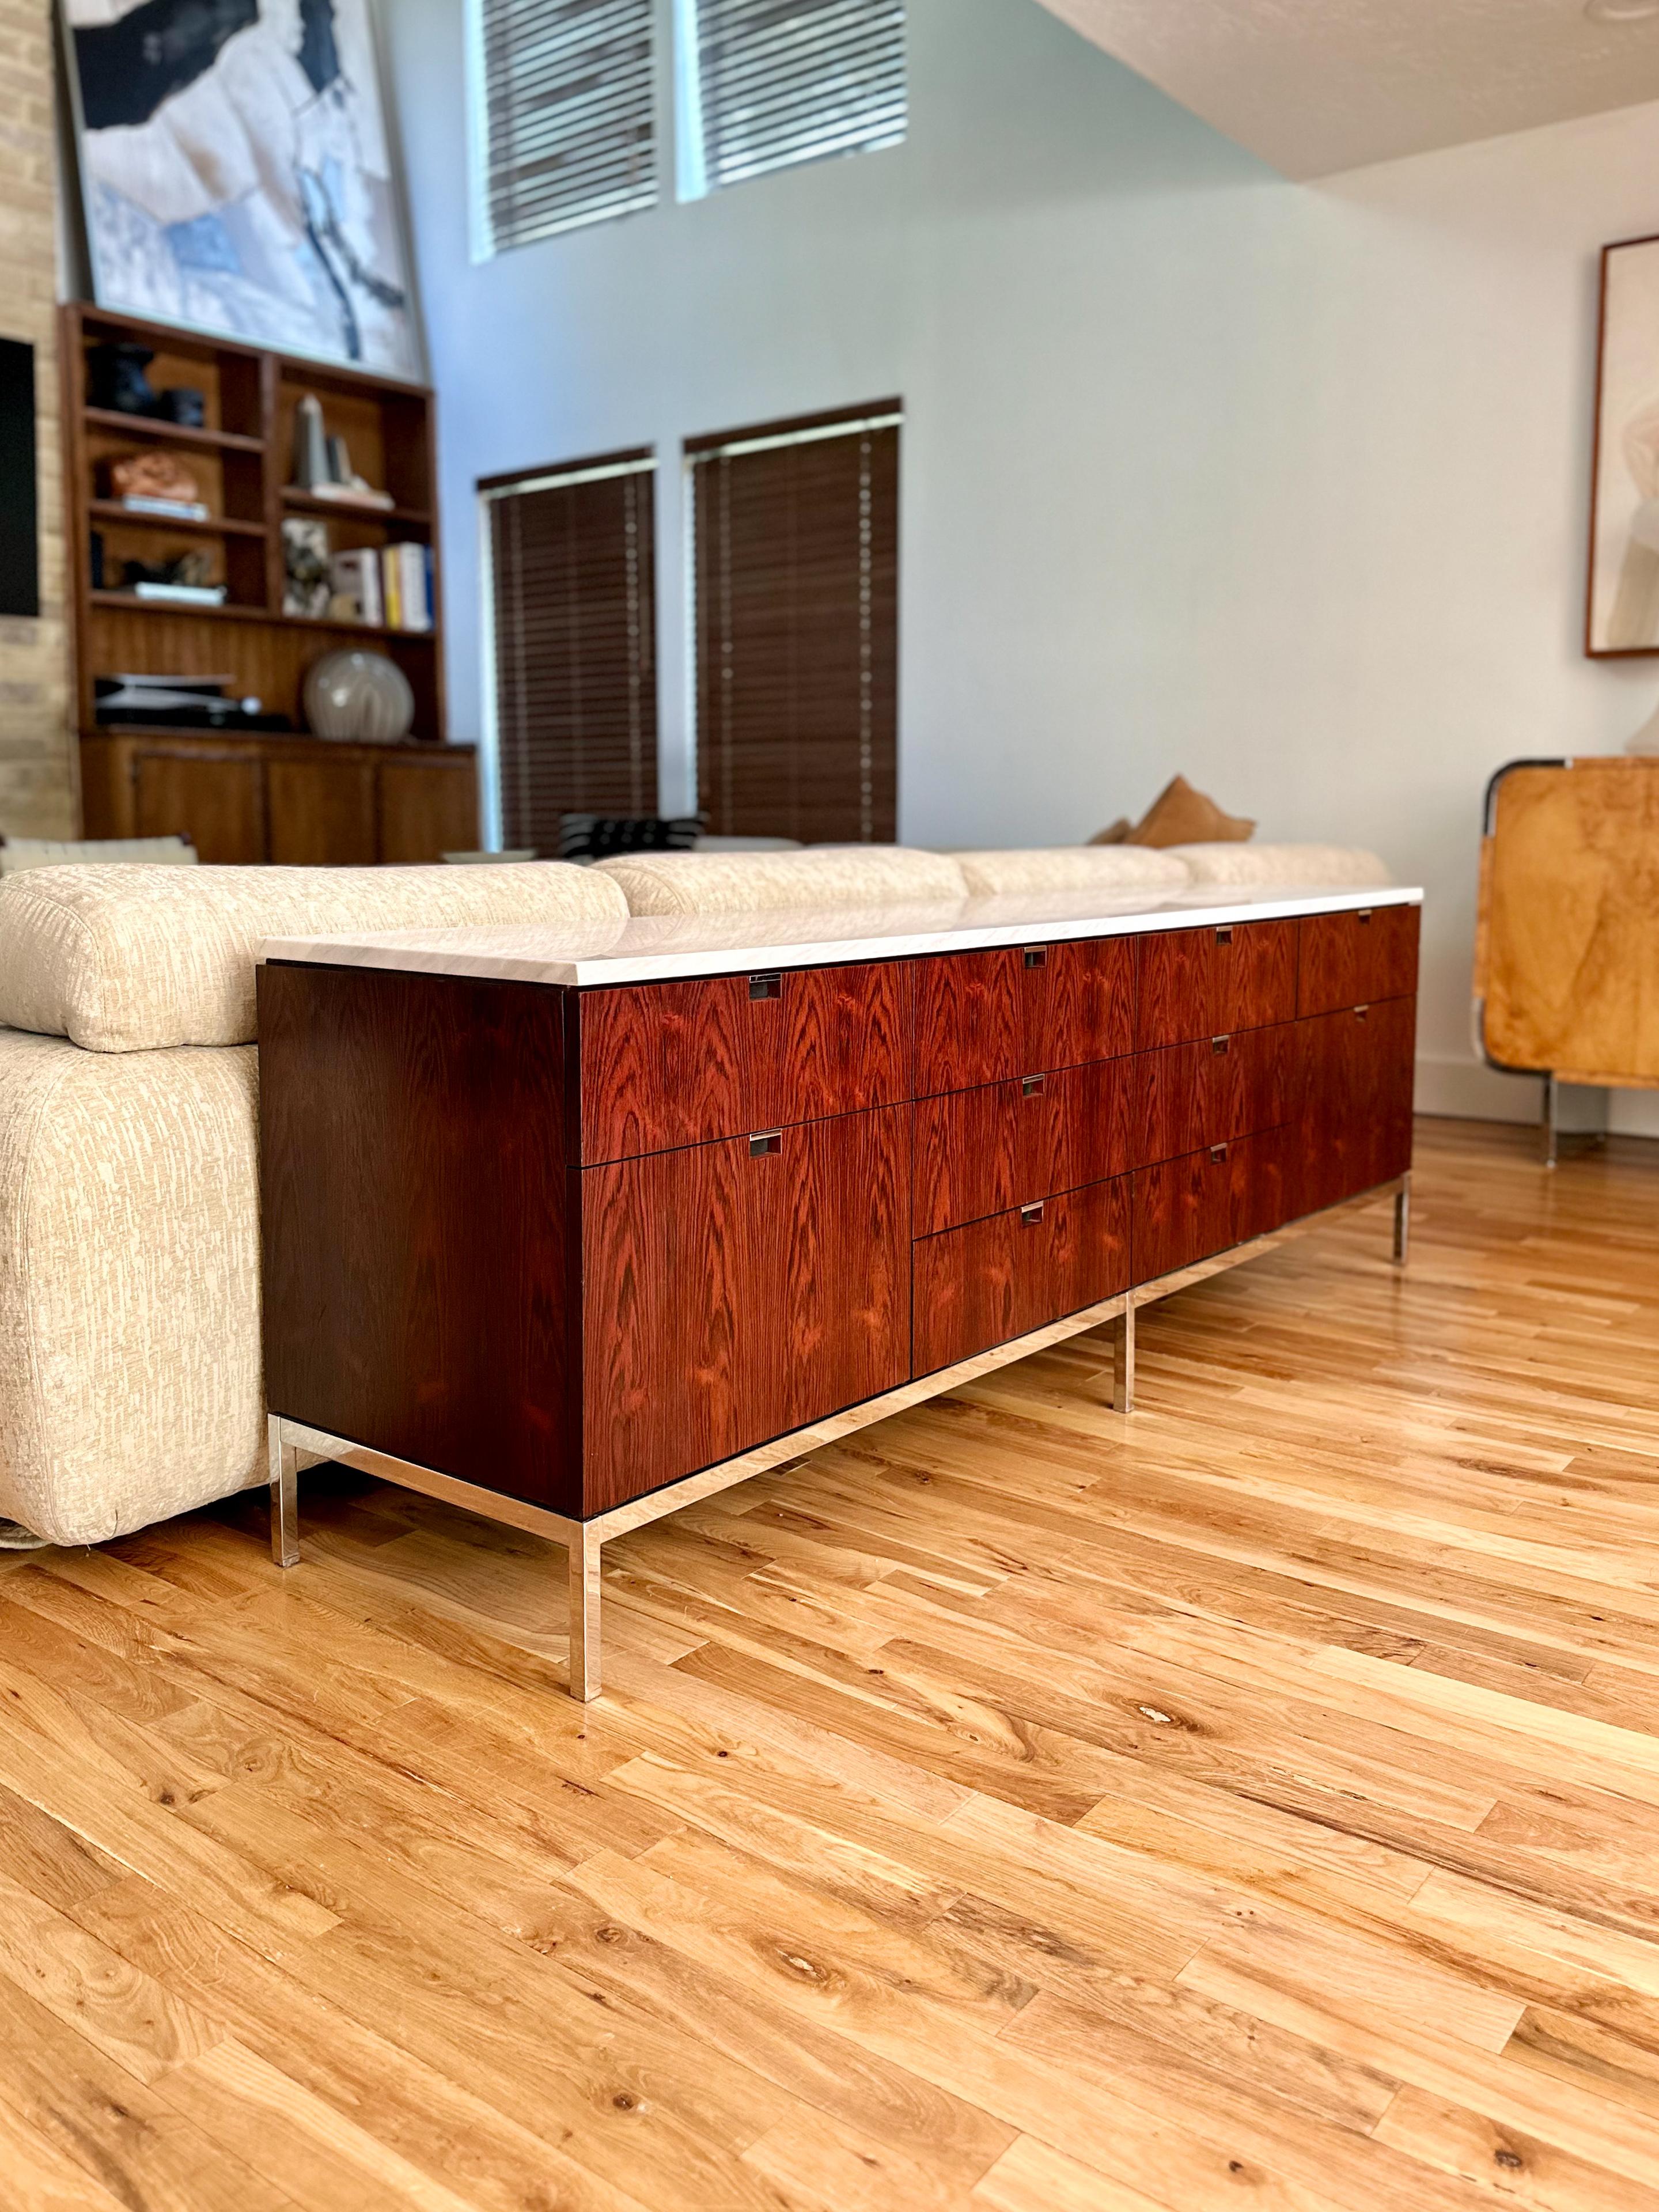 Stunning Florence Knoll marble-top rosewood credenza, c.1960s. Polished chrome base, rosewood veneer, and Olympus Calacatta marble top make this piece drop dead gorgeous, while the 4-position configuration with 8 drawers and 2 filing drawers